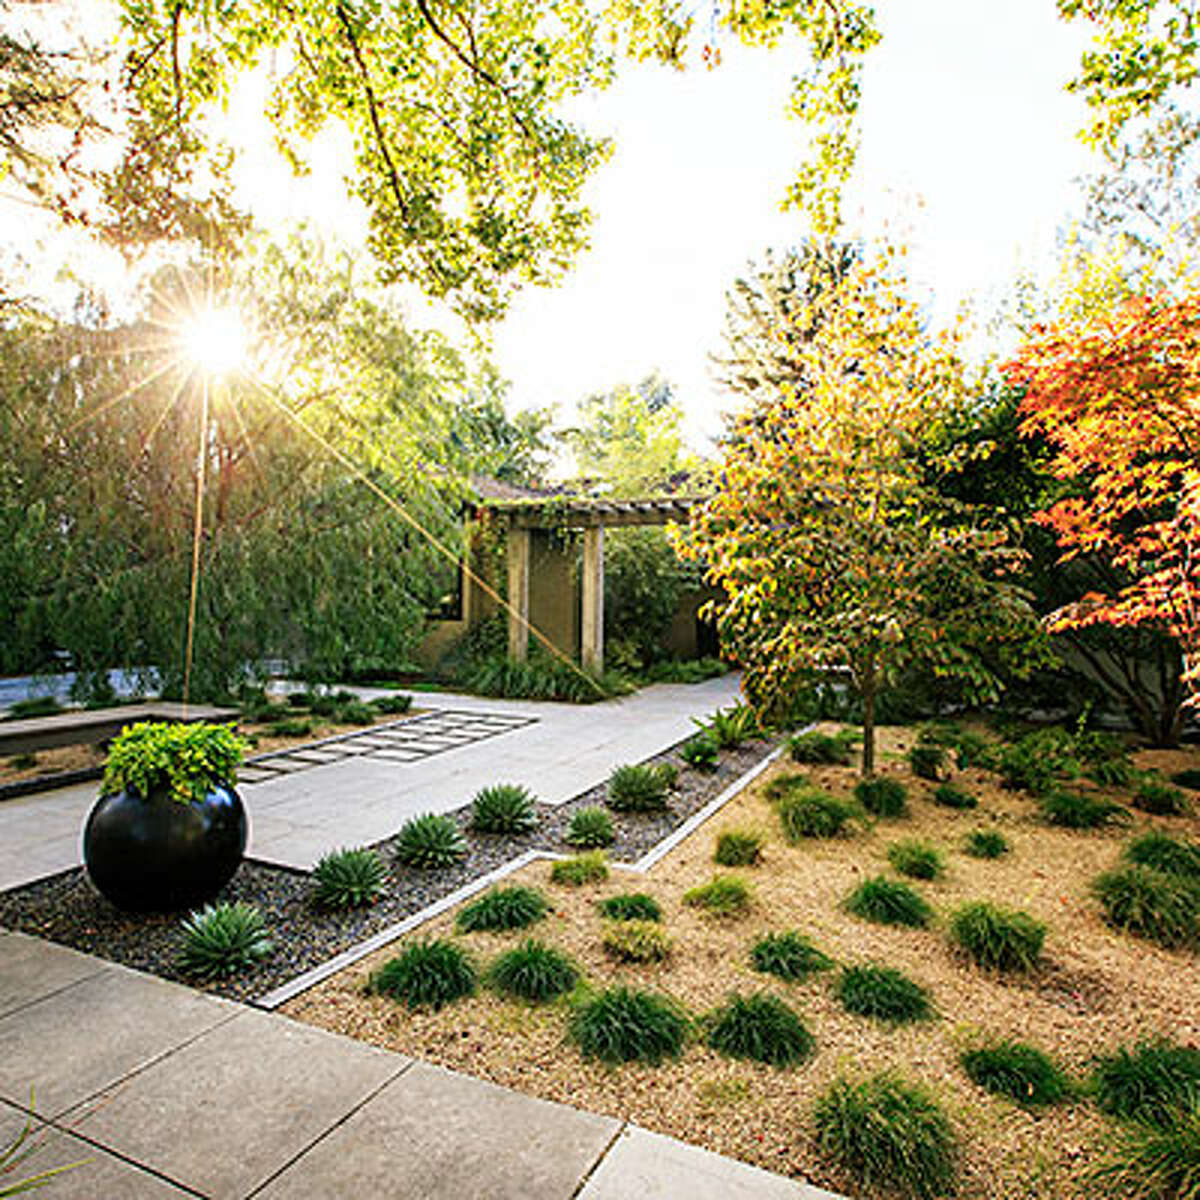 24 Lawn-Free Backyards to Inspire your Spring Gardening